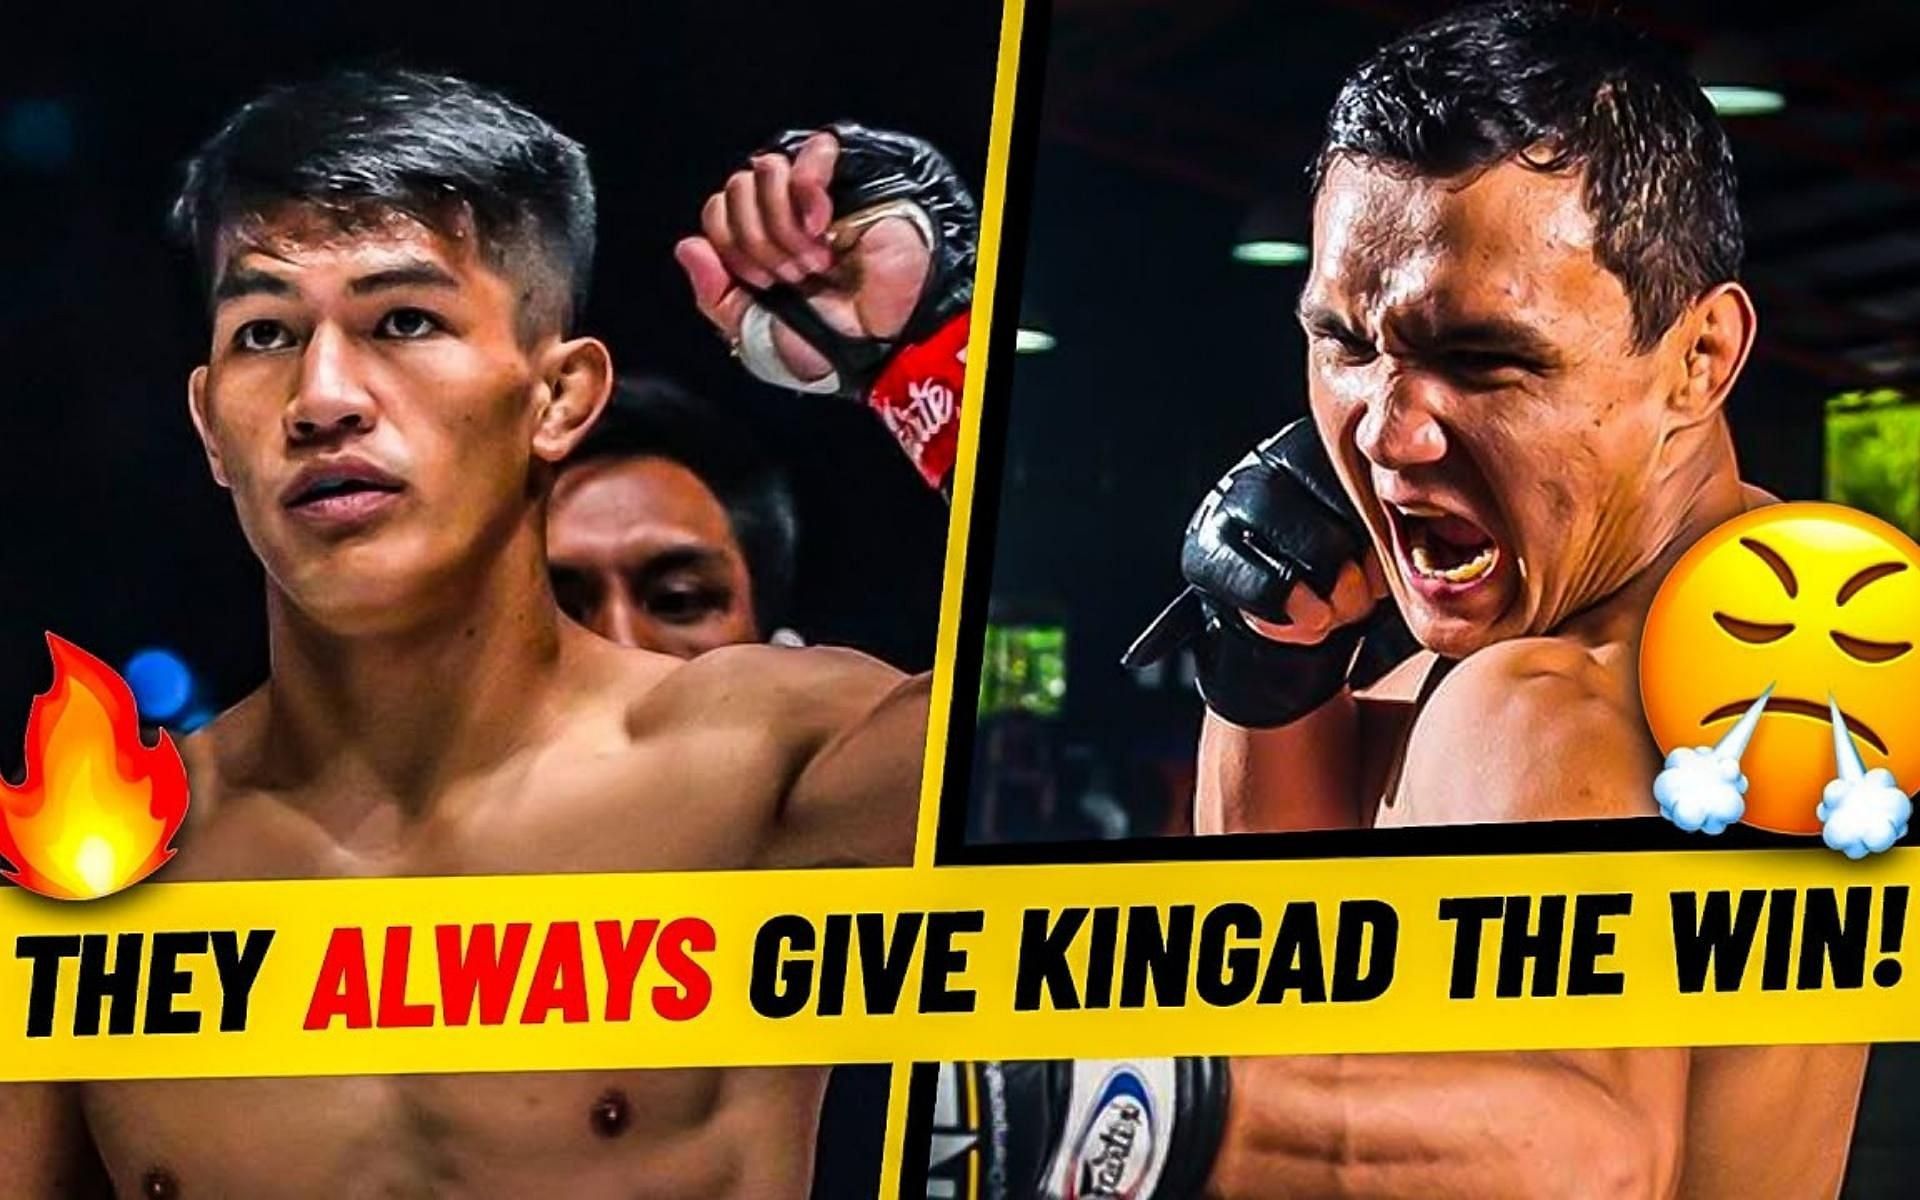 Former ONE Championship flyweight world champ Kairat Akhmetov (right) has some bold statements on his opponent in the main event of ONE: Winter Warriors II, Danny &#039;The King&#039; Kingad (left). (Image courtesy of ONE Championship)